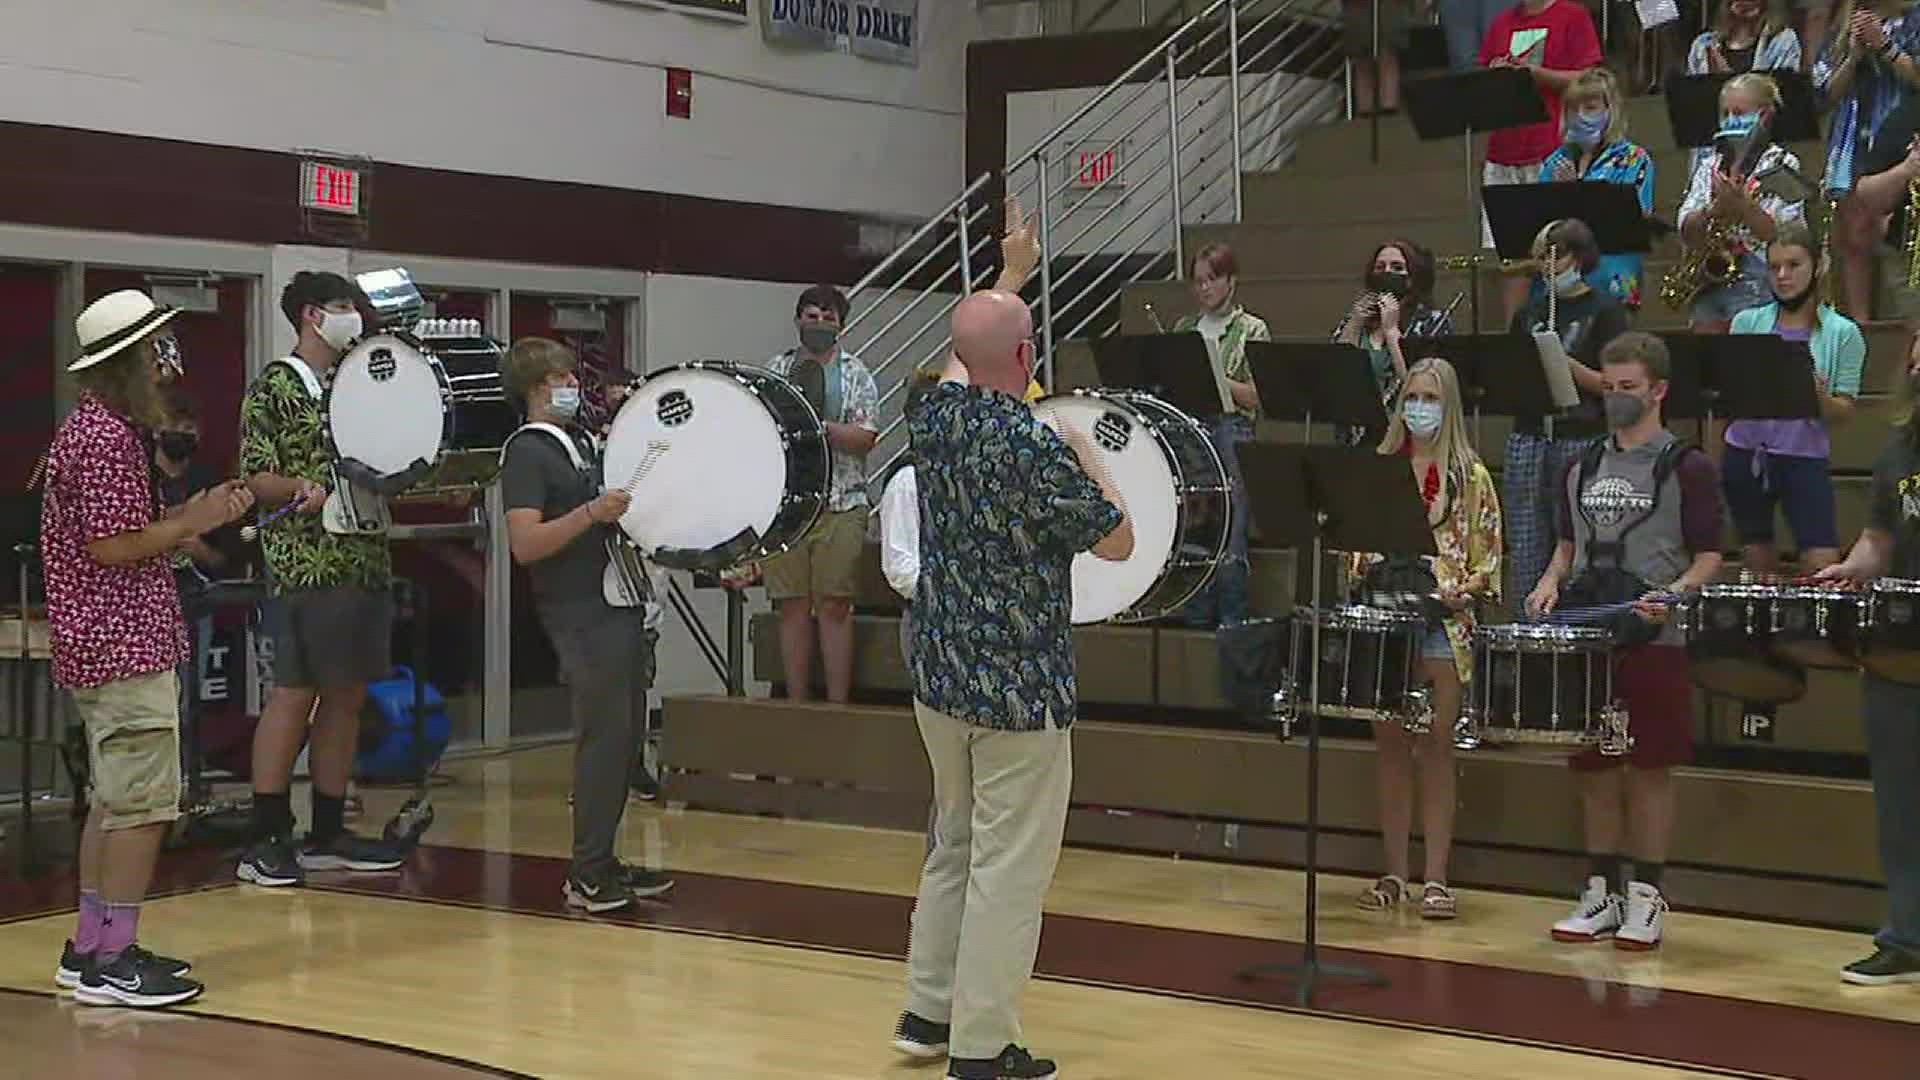 News 8 sports and weather attends Rockridge High School's pep rally on Friday, September 3rd.